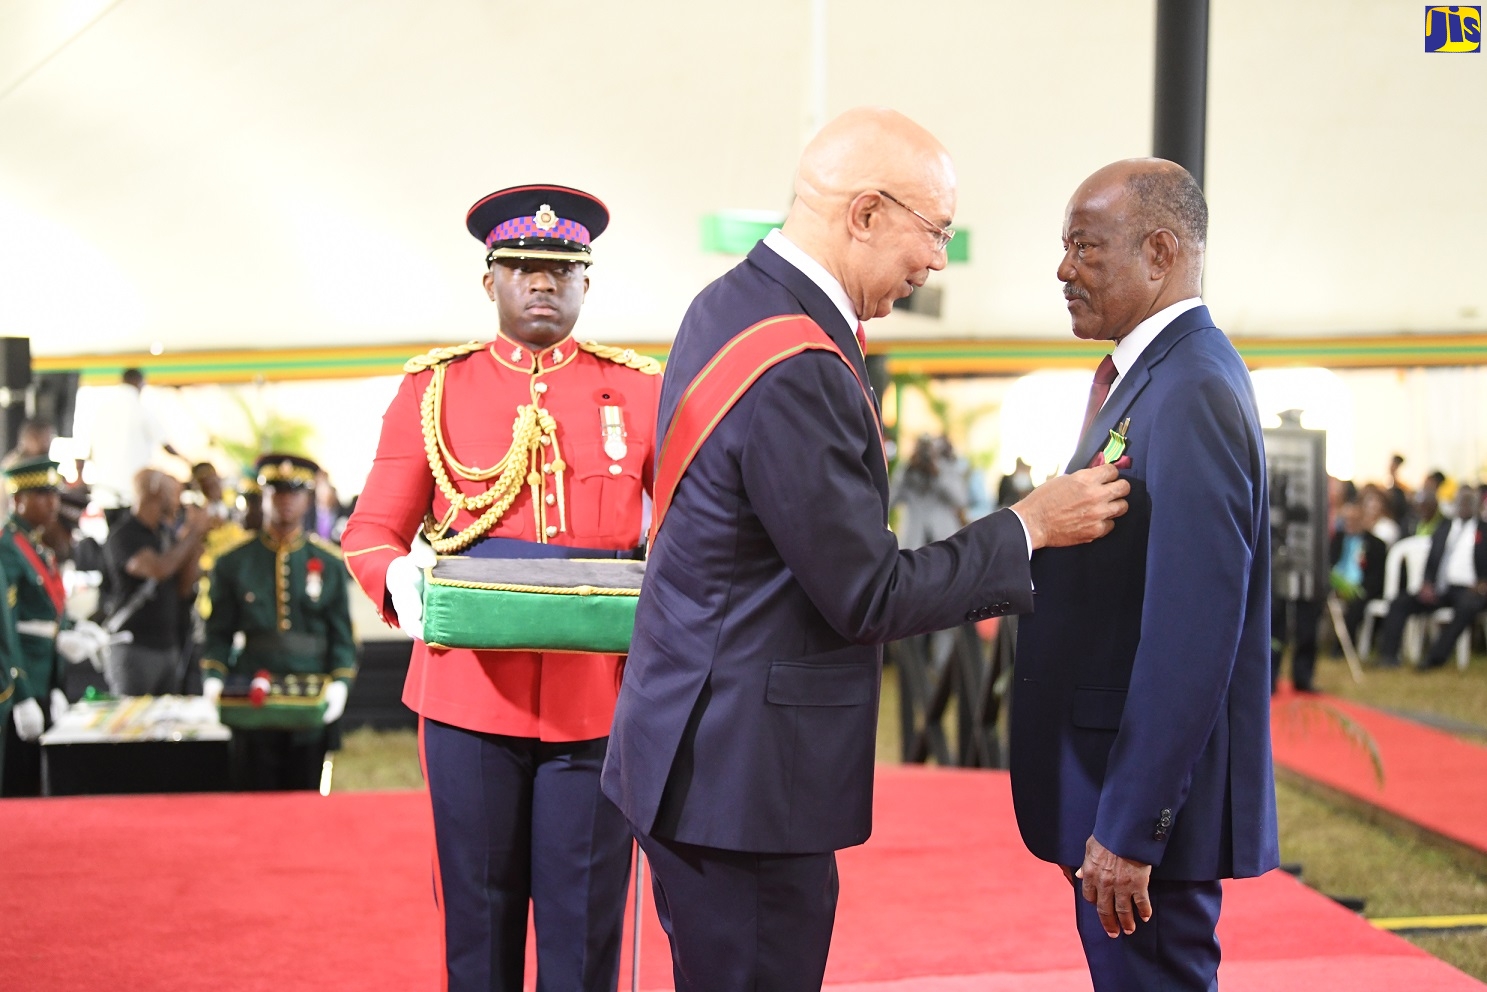 Governor-General, His Excellency, the Most Hon. Sir Patrick Allen (centre), presents George Samuel Johnson (right) with the Order of Distinction (OD) in the rank of Officer (OD), during the 2022 Ceremony of Investiture and Presentation of National Honours and Awards, held at King’s House in Kingston on October 17.

